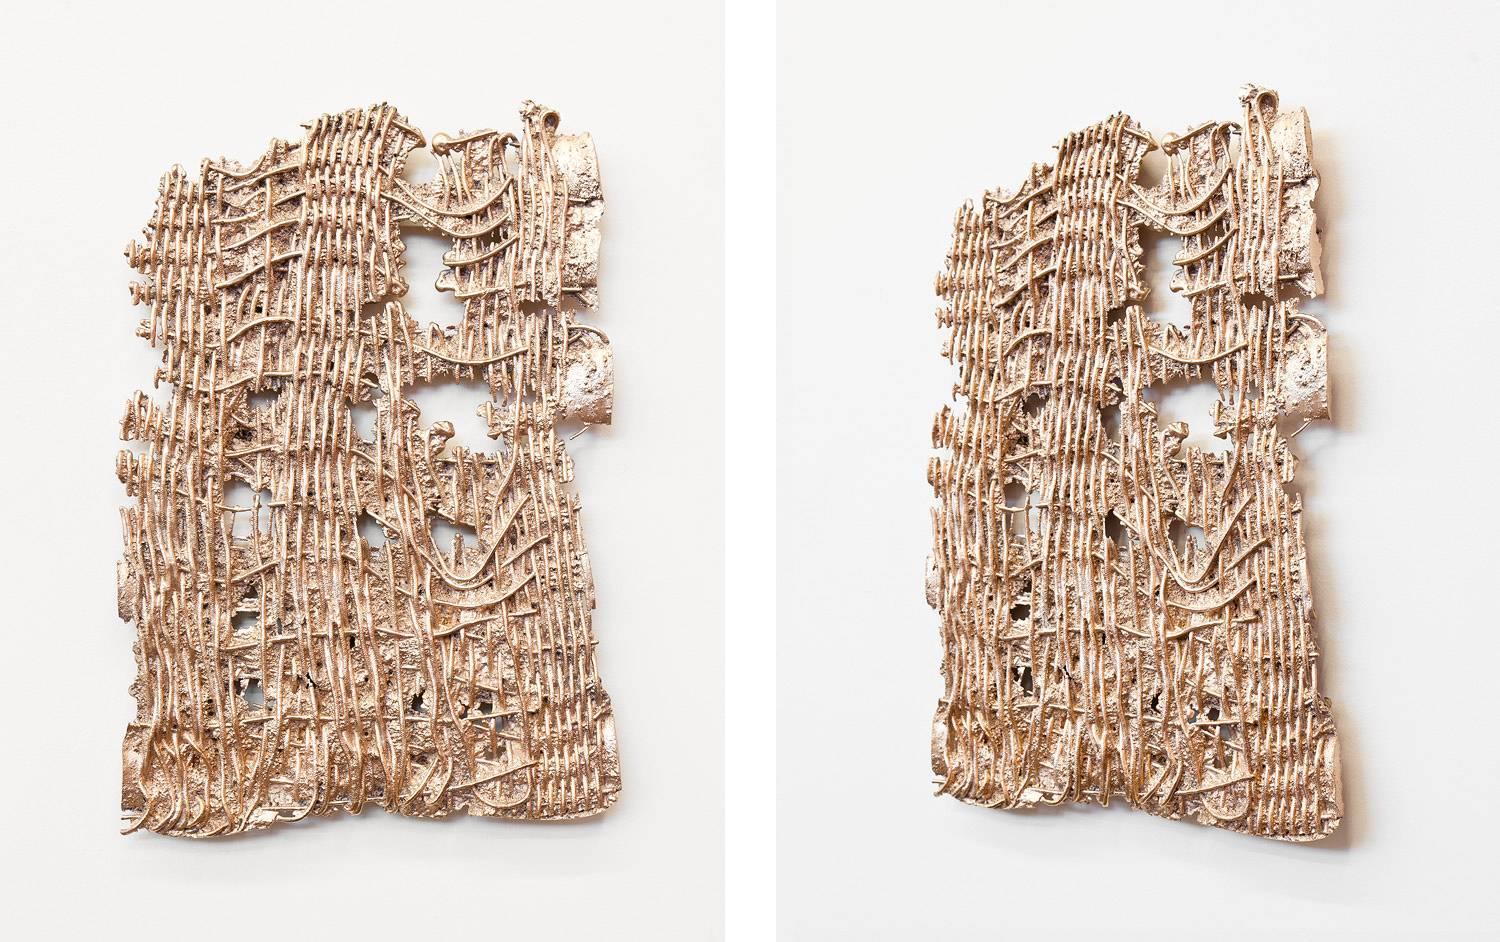 Post-Modern Contemporary Wall Mounted Metal Sculpture, Bronze Cast 2 by Mimi Jung